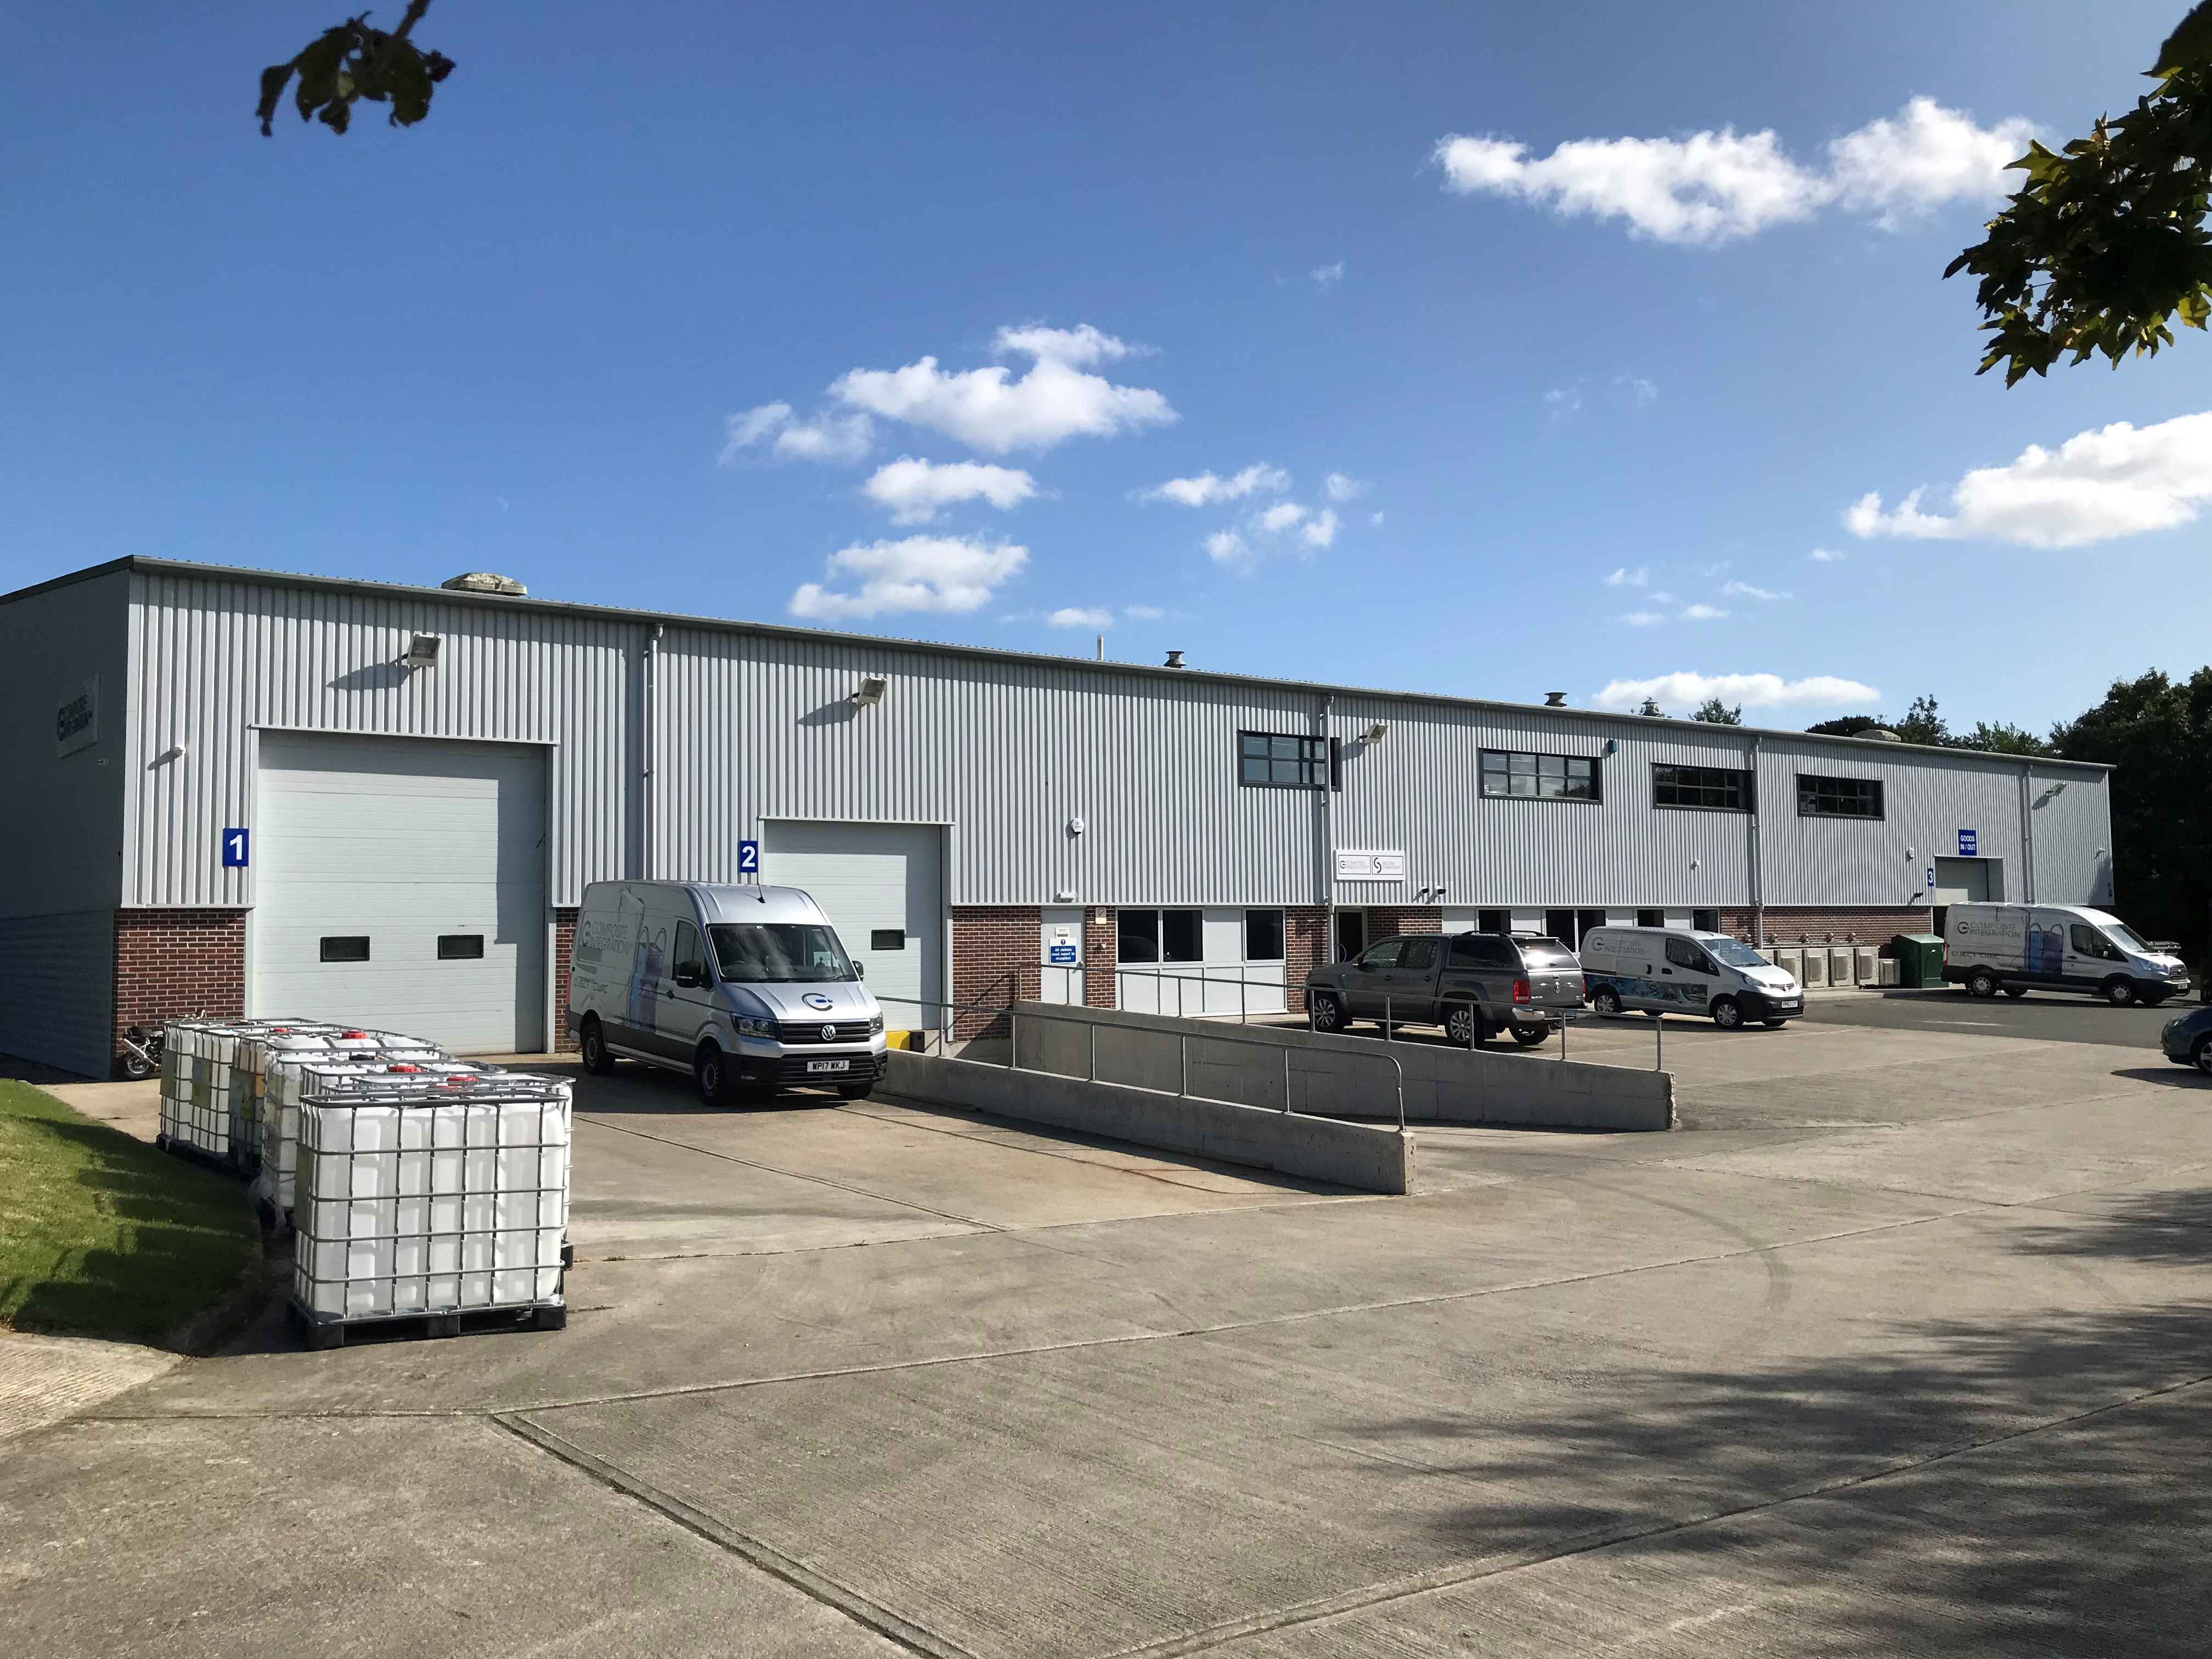 Composite Integration has moved to a new facility site in Saltash, UK.